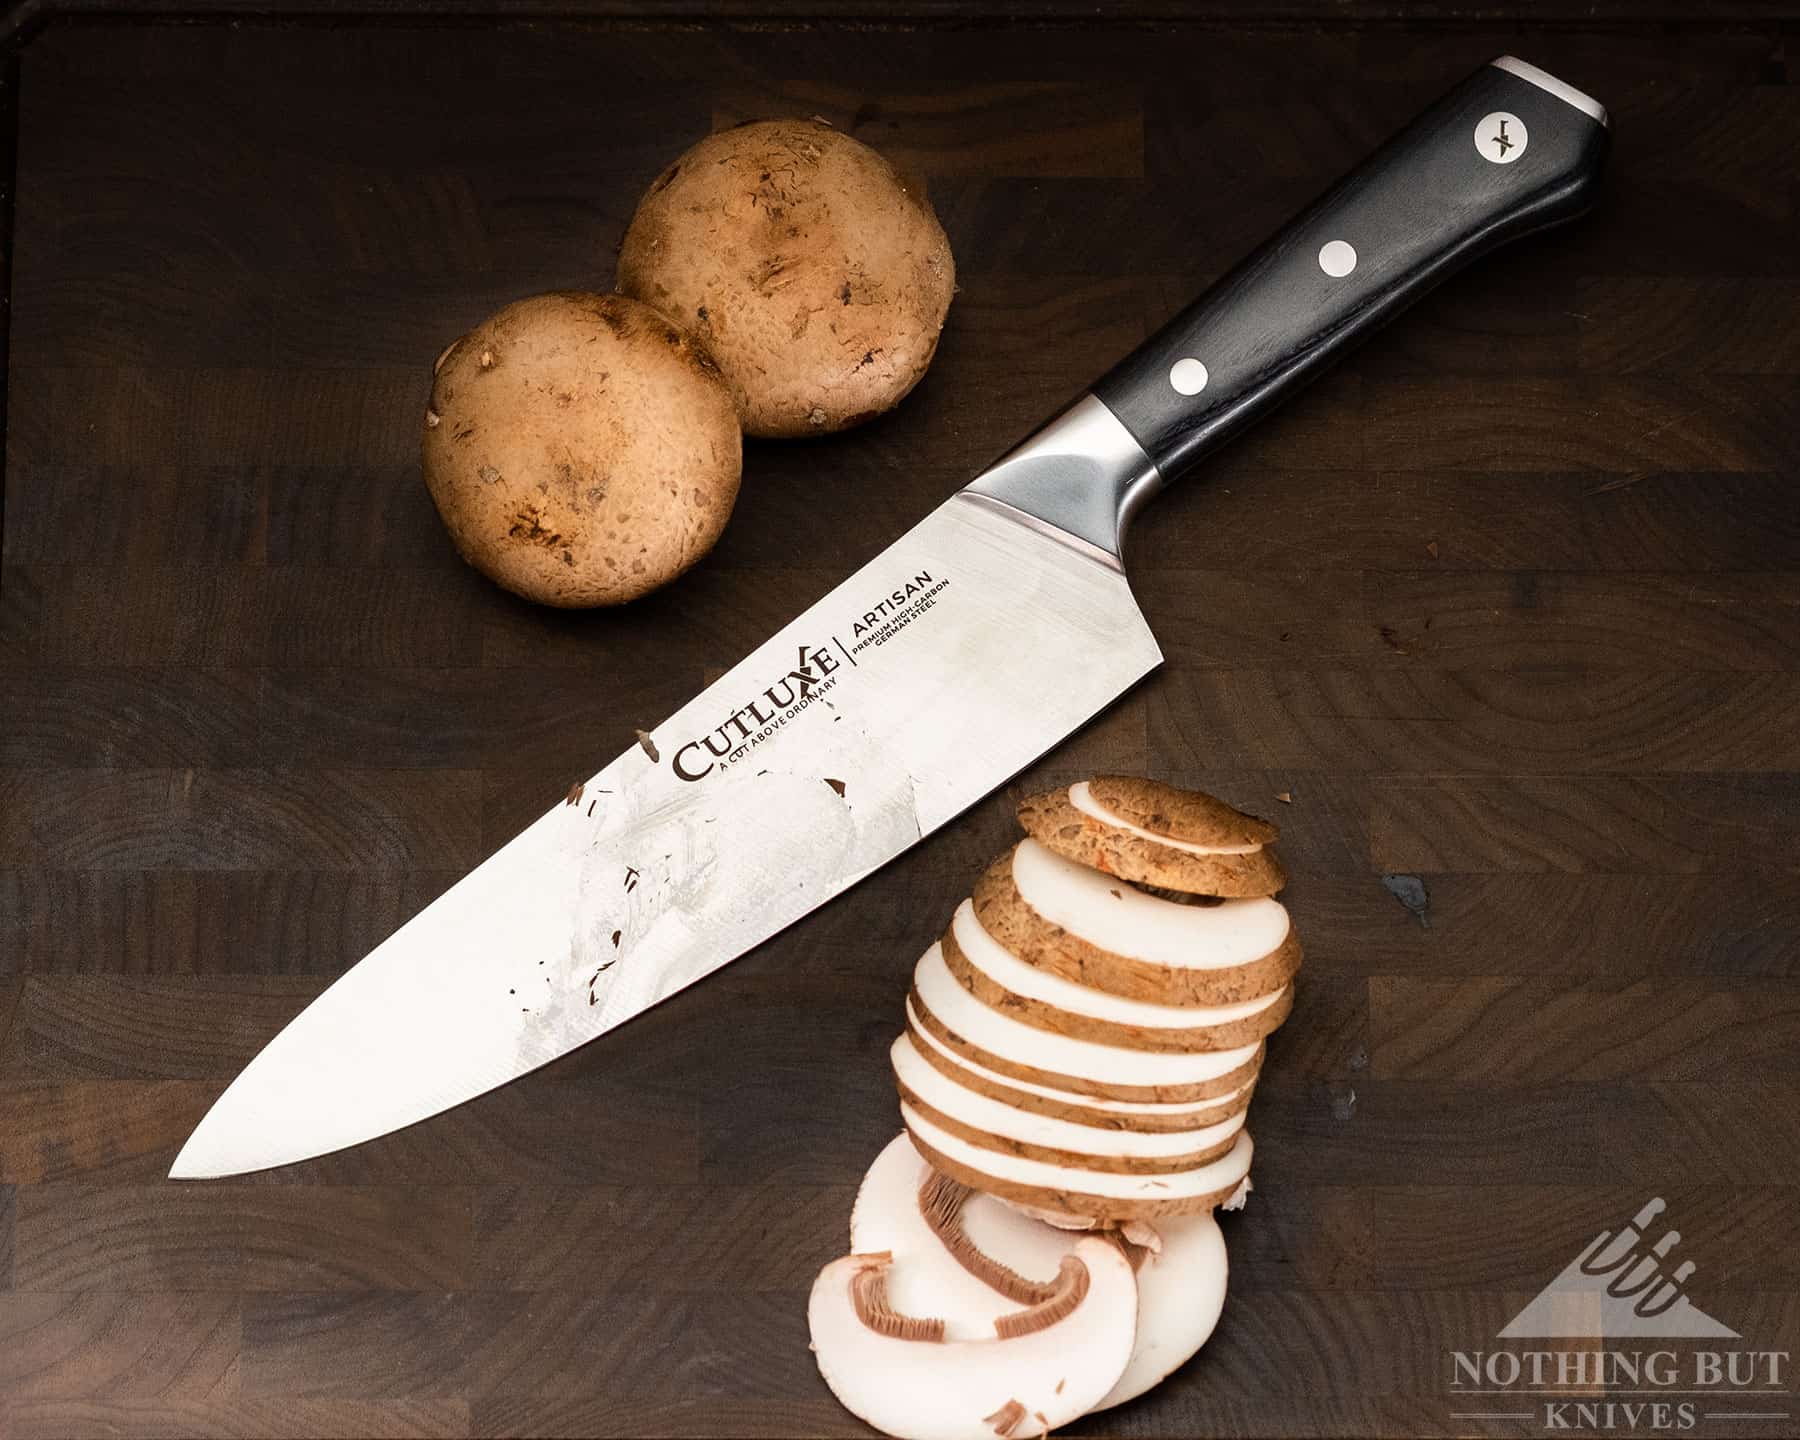 https://www.nothingbutknives.com/wp-content/uploads/2023/01/Home-Cooking-with-the-Cutluxe-Artisan-Chef-Knife.jpg